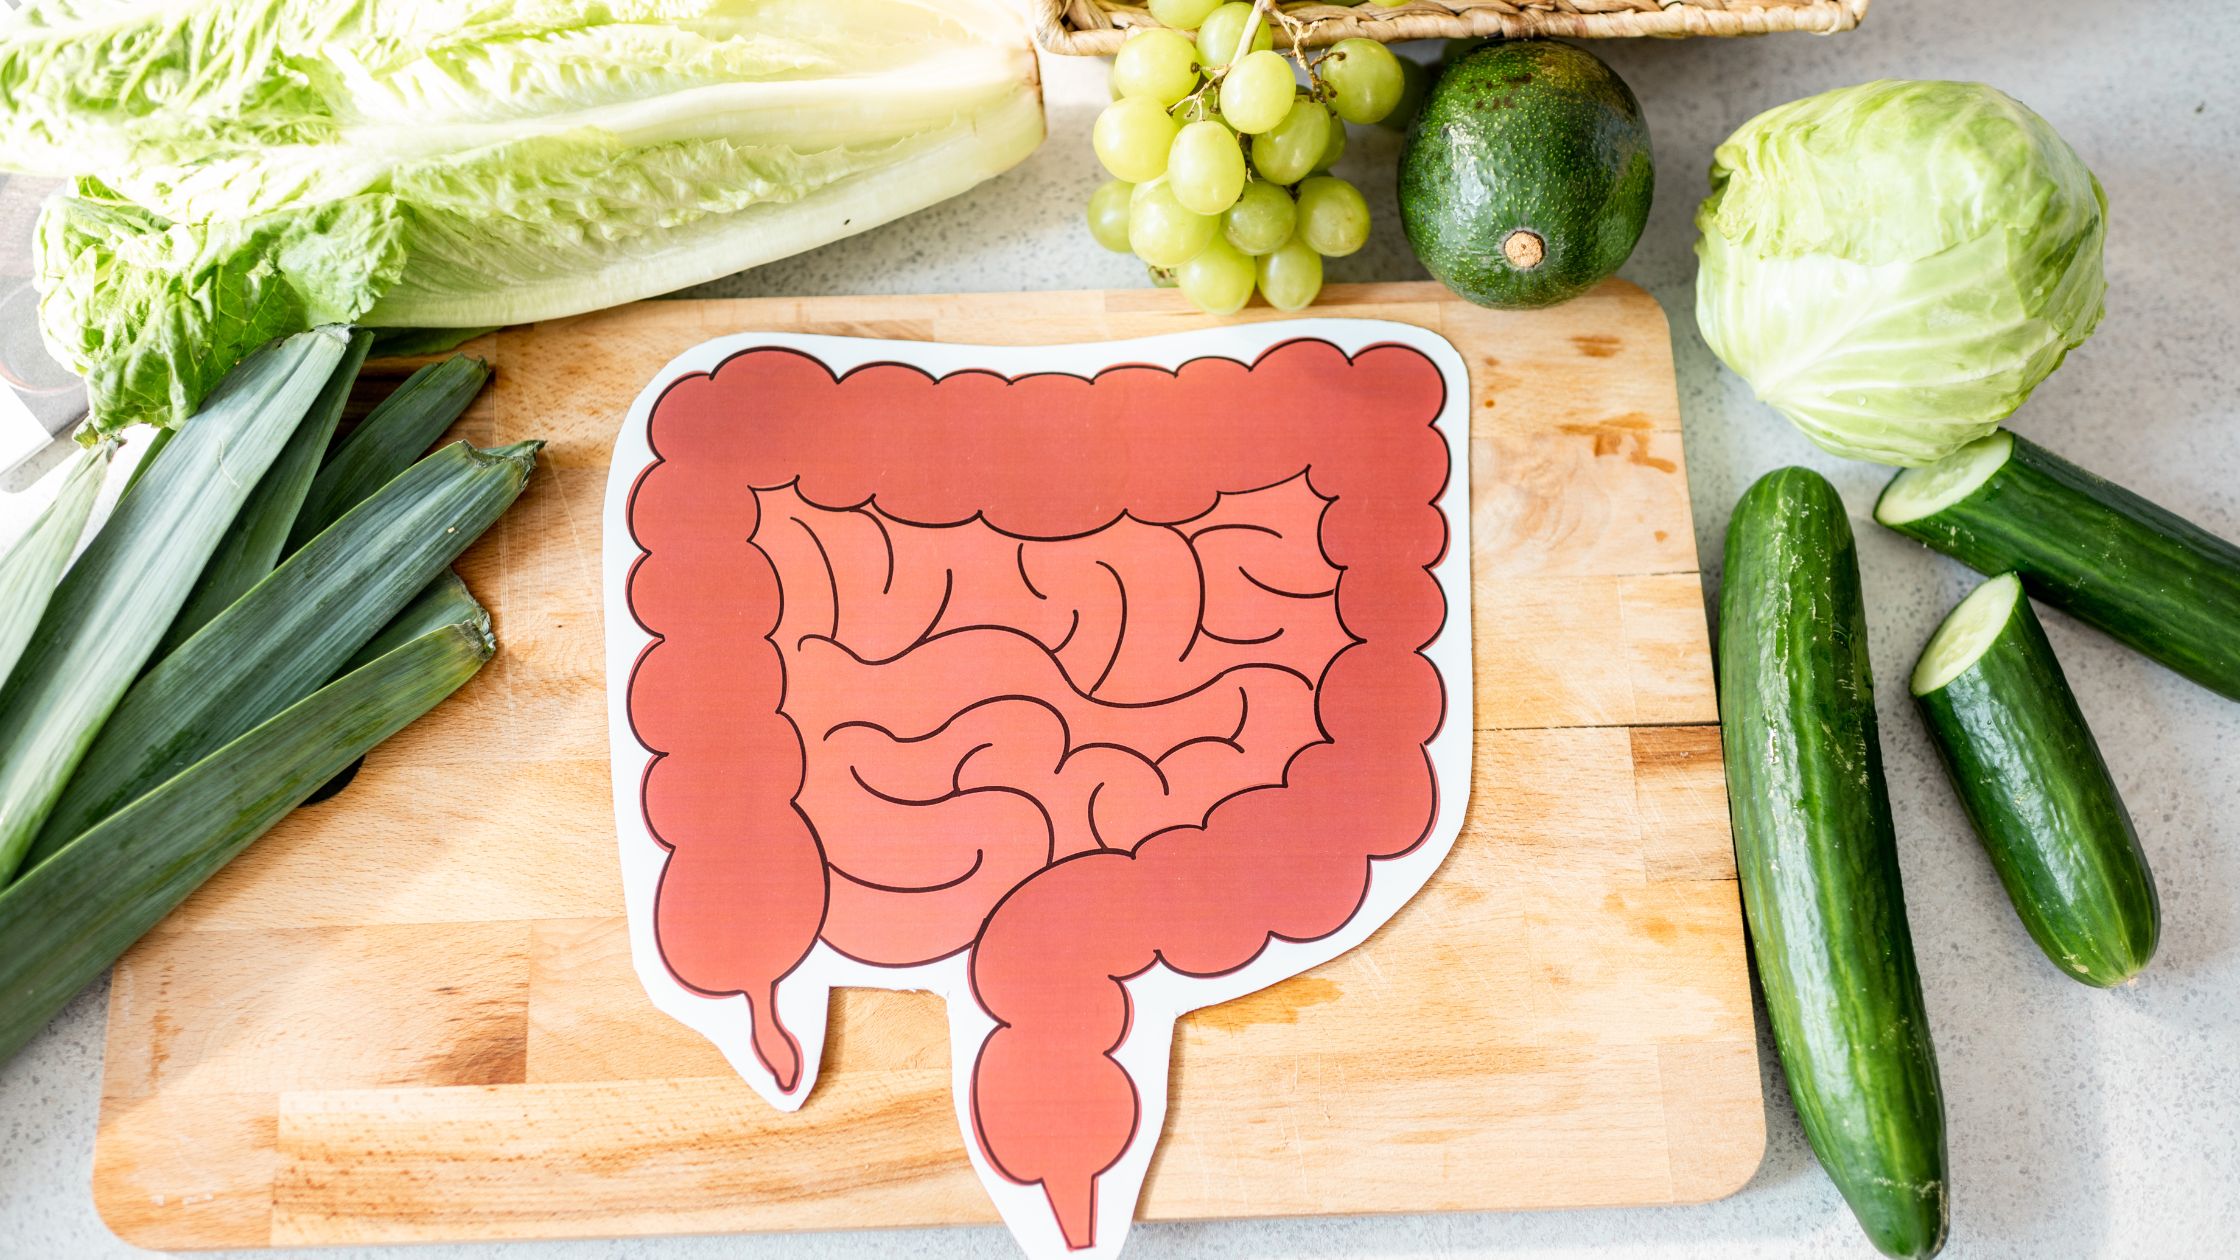 It’s Time To Look After Your Gut Health